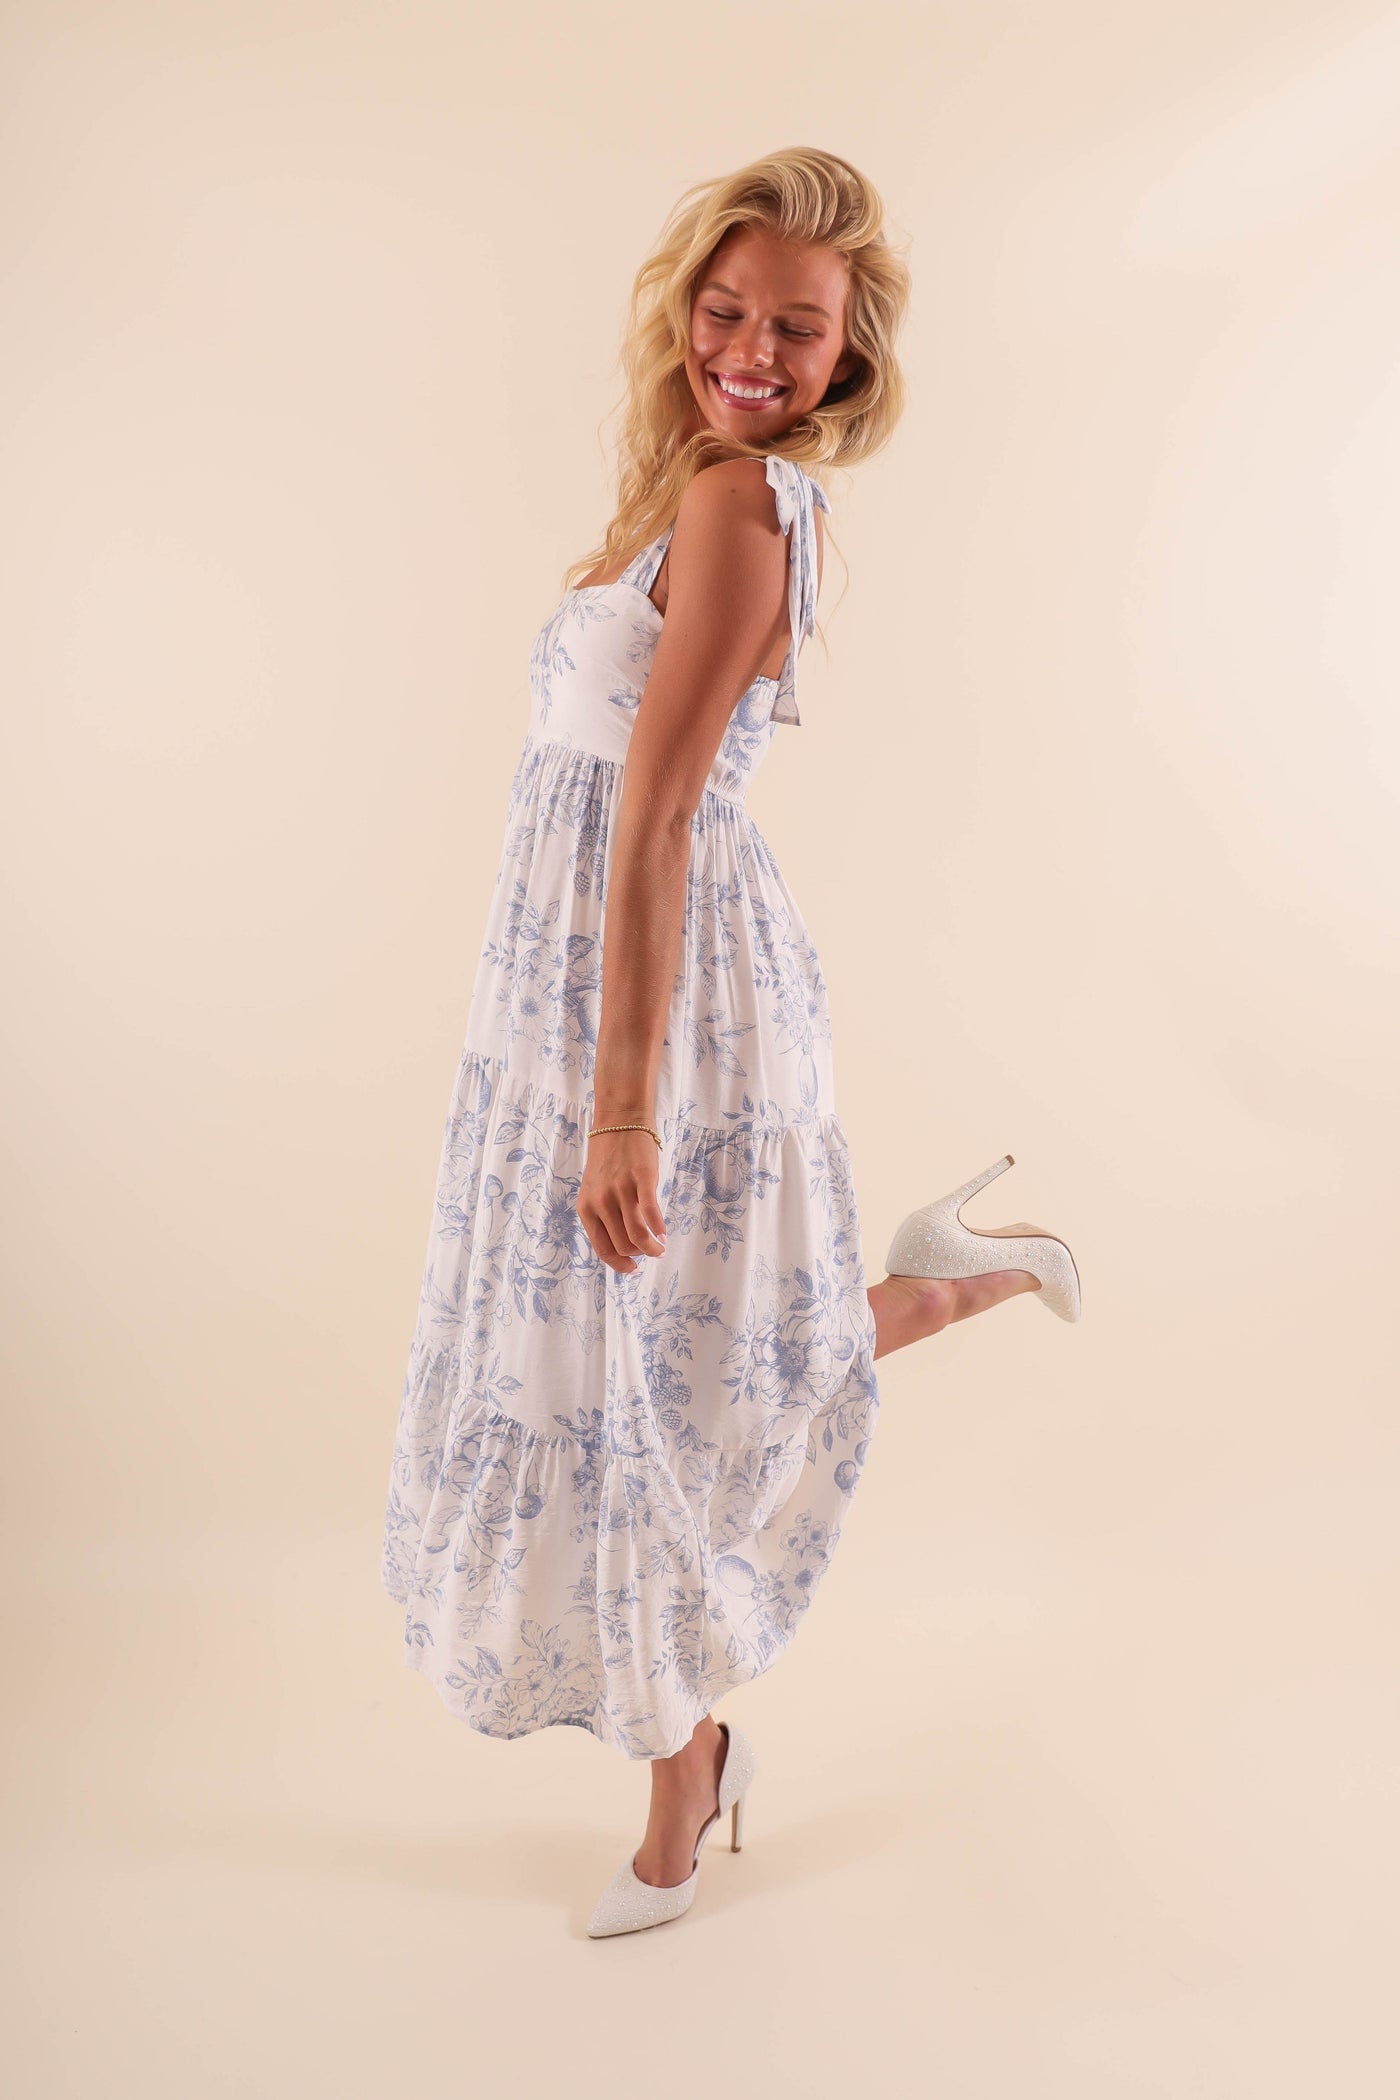 White Tiered Midi Dress with Blue Floral Design and Tie Straps